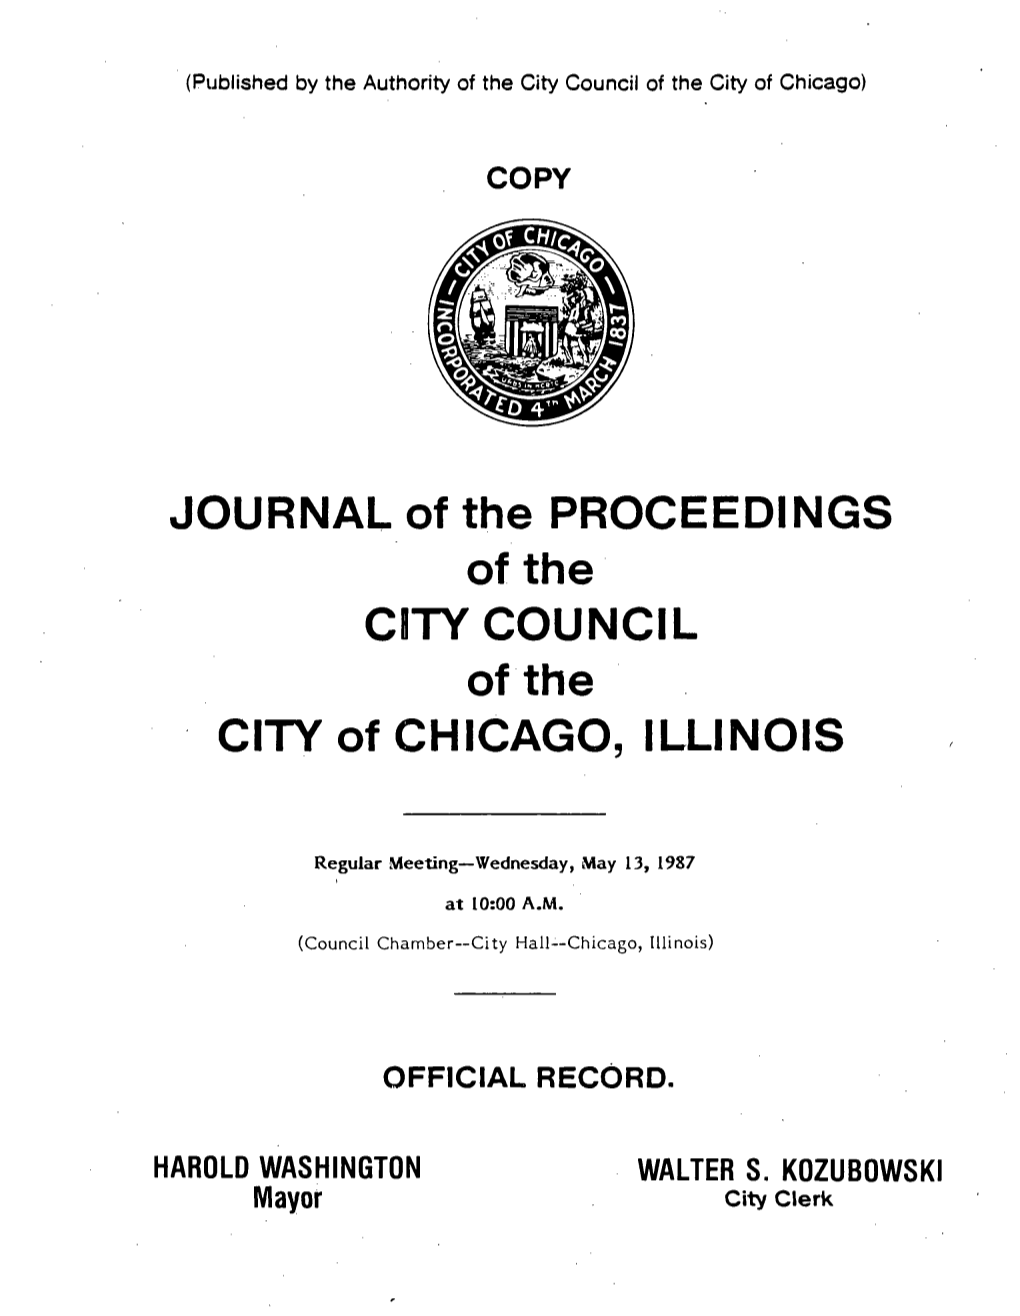 JOURNAL of the PROCEEDINGS of the CITYCOUNCIL of the CITY of CHICAGO, ILLINOIS